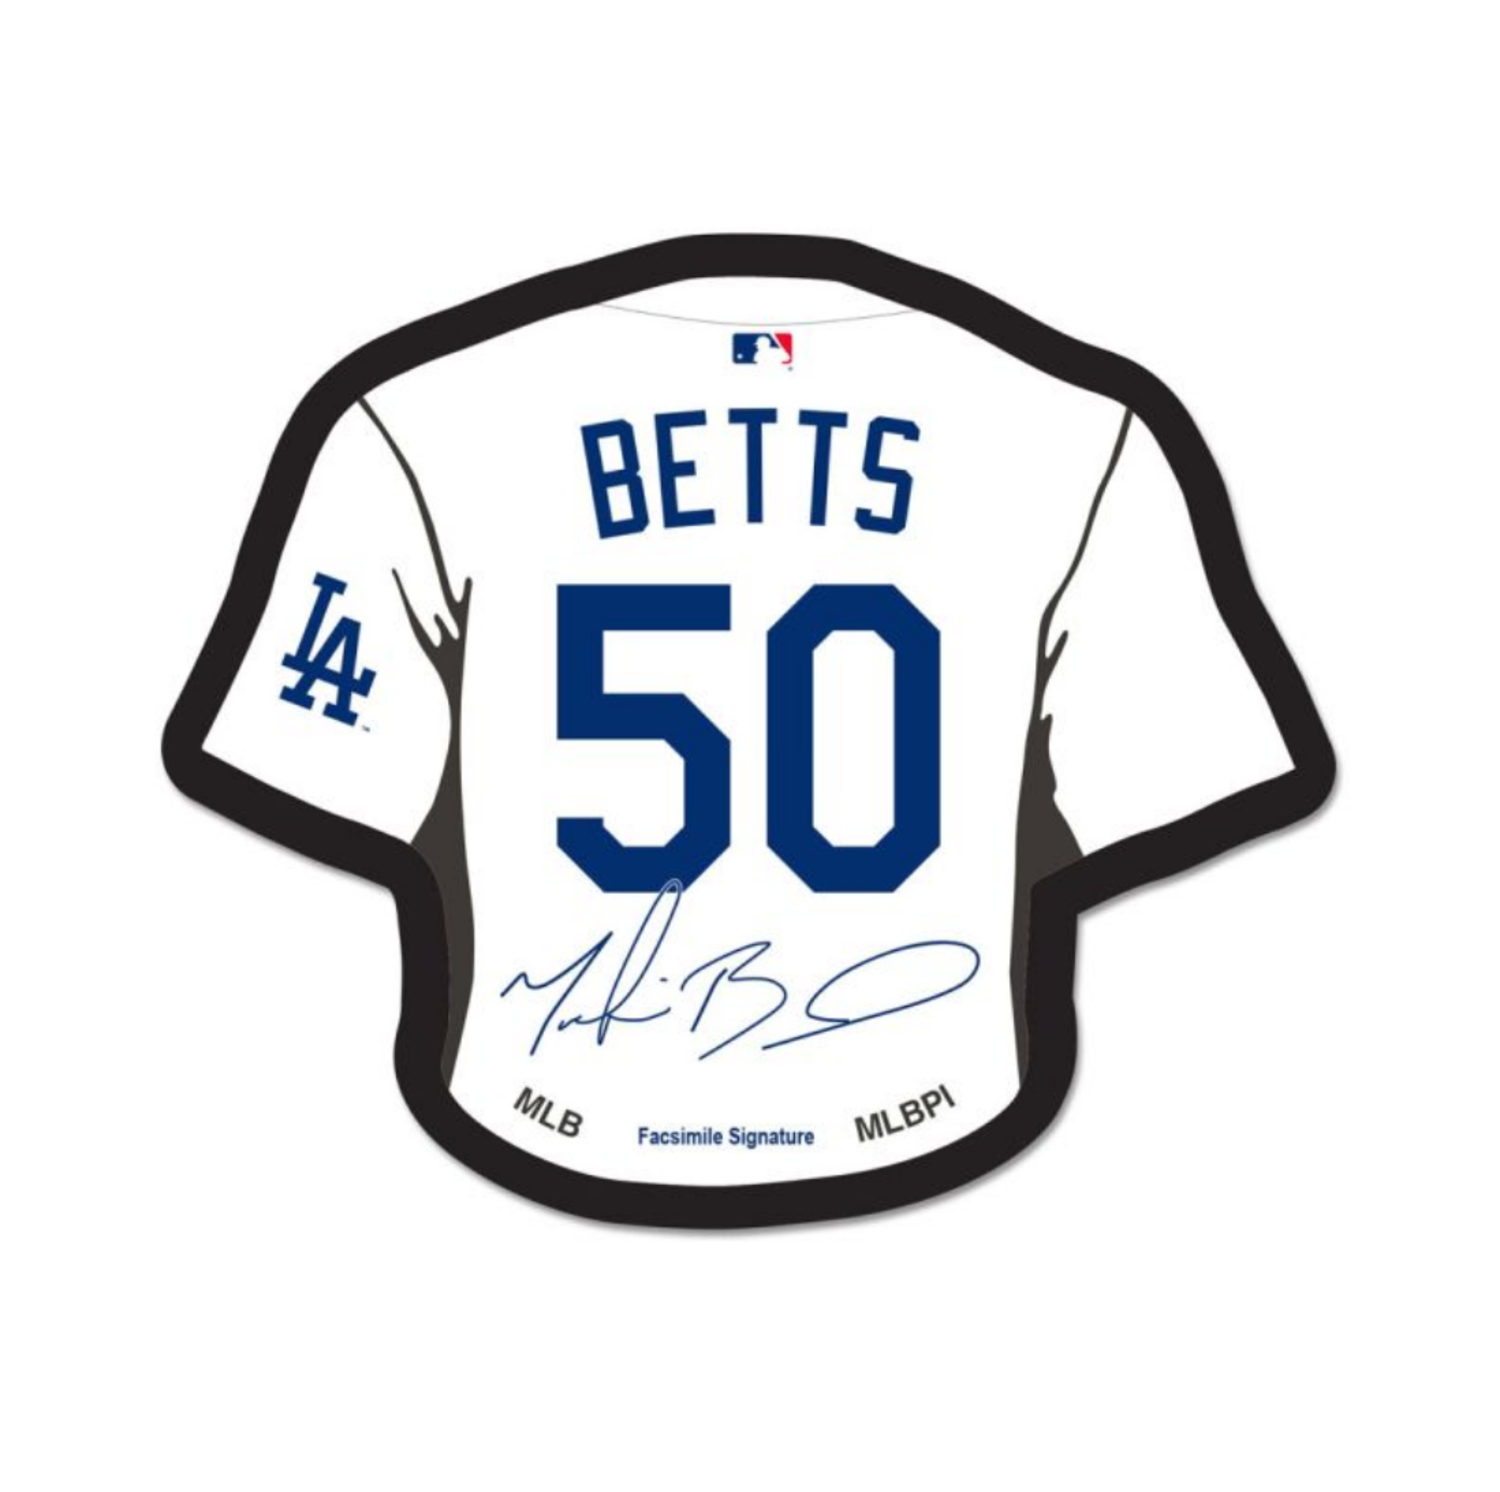 Dodgers Betts Home Jersey Signature Pin - The Locker Room of Downey